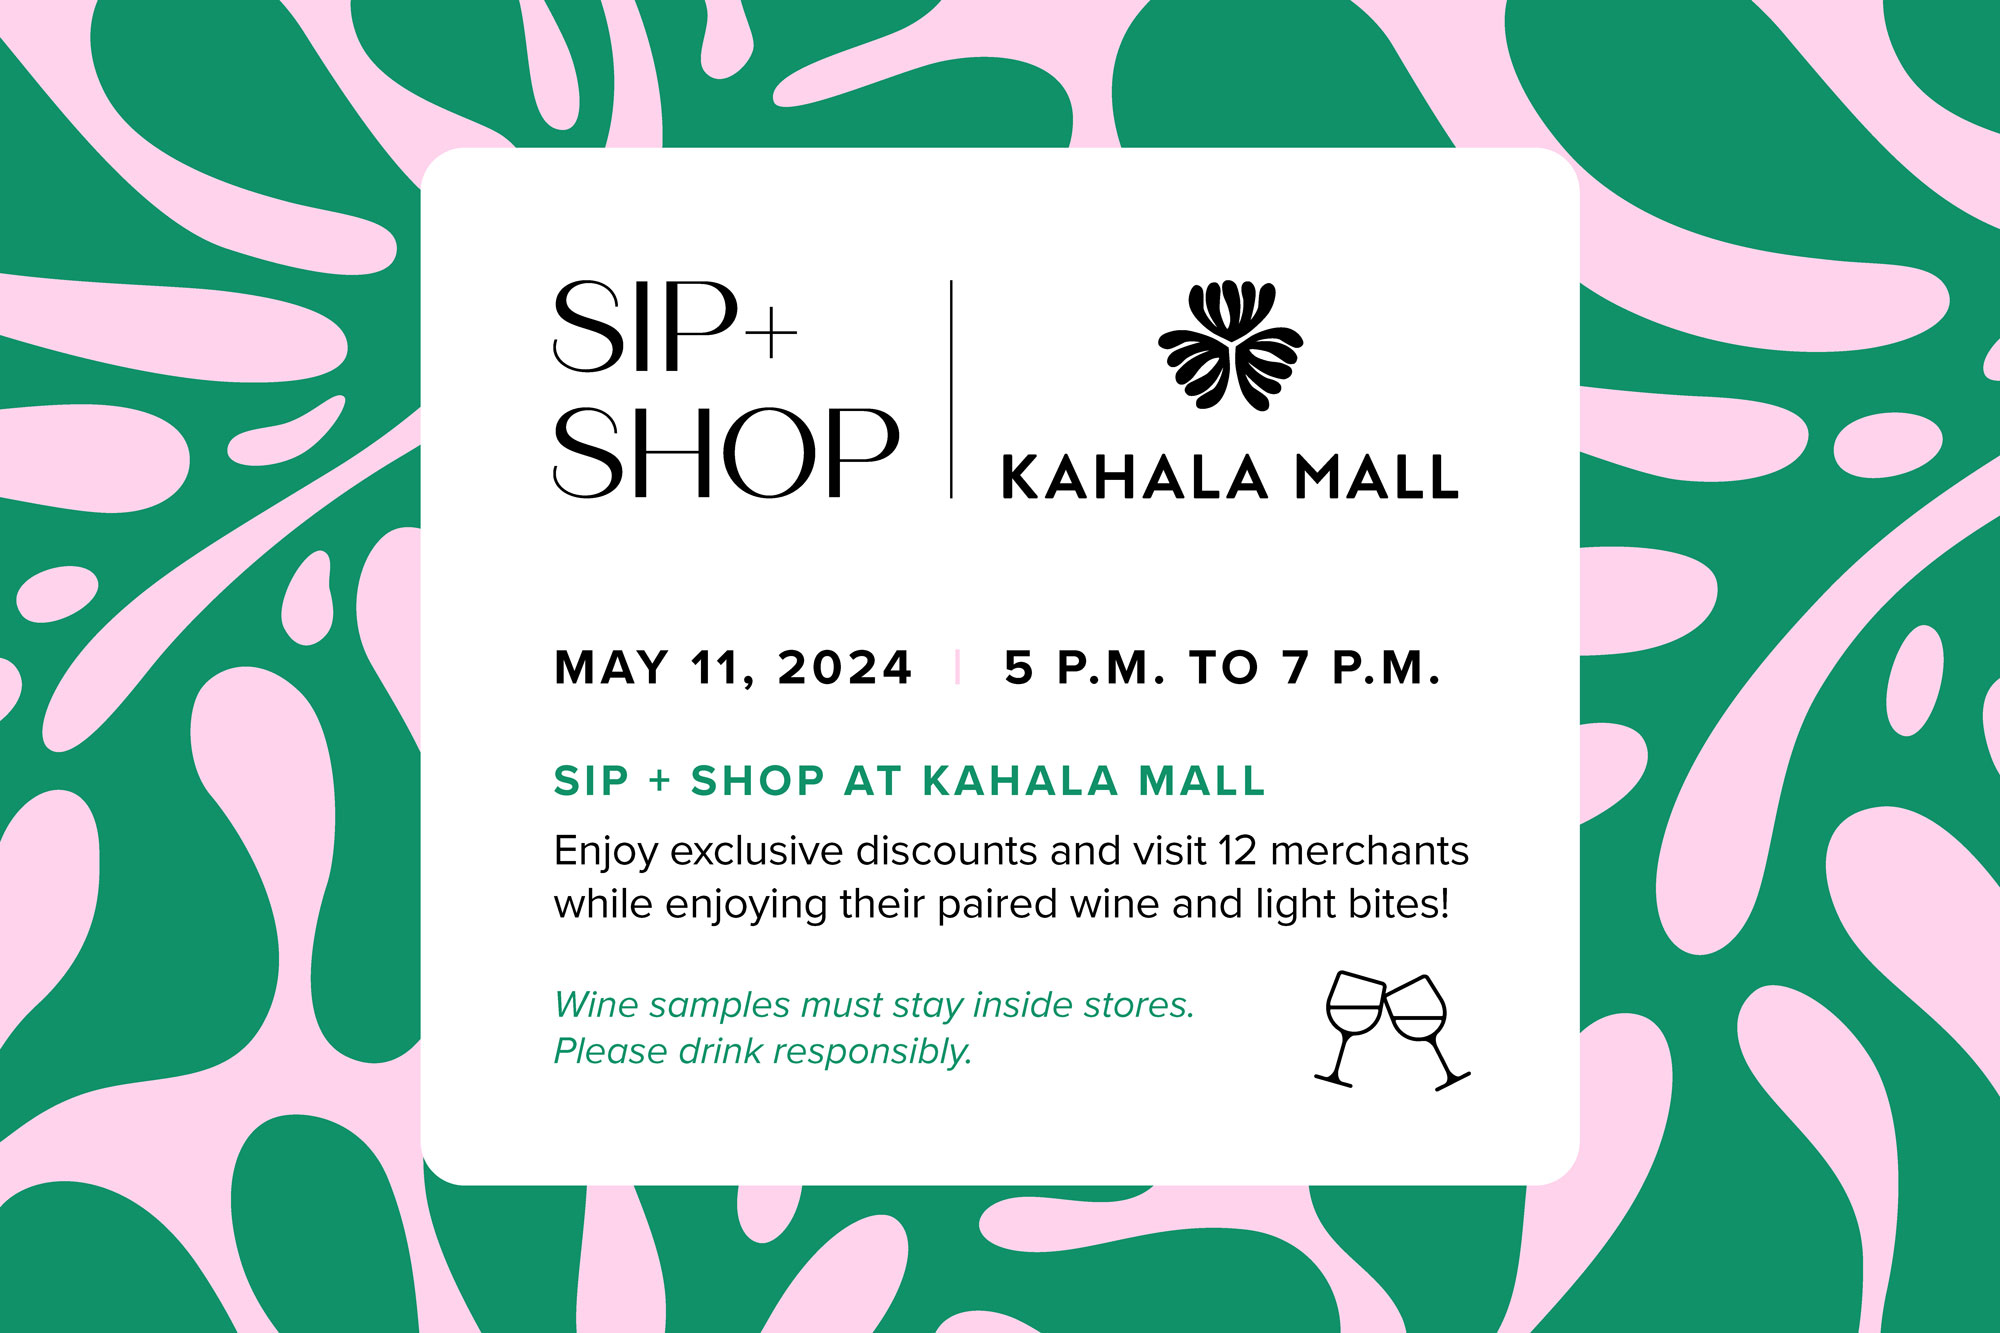 YOU'RE INVITED to the SIP+SHOP EVENT